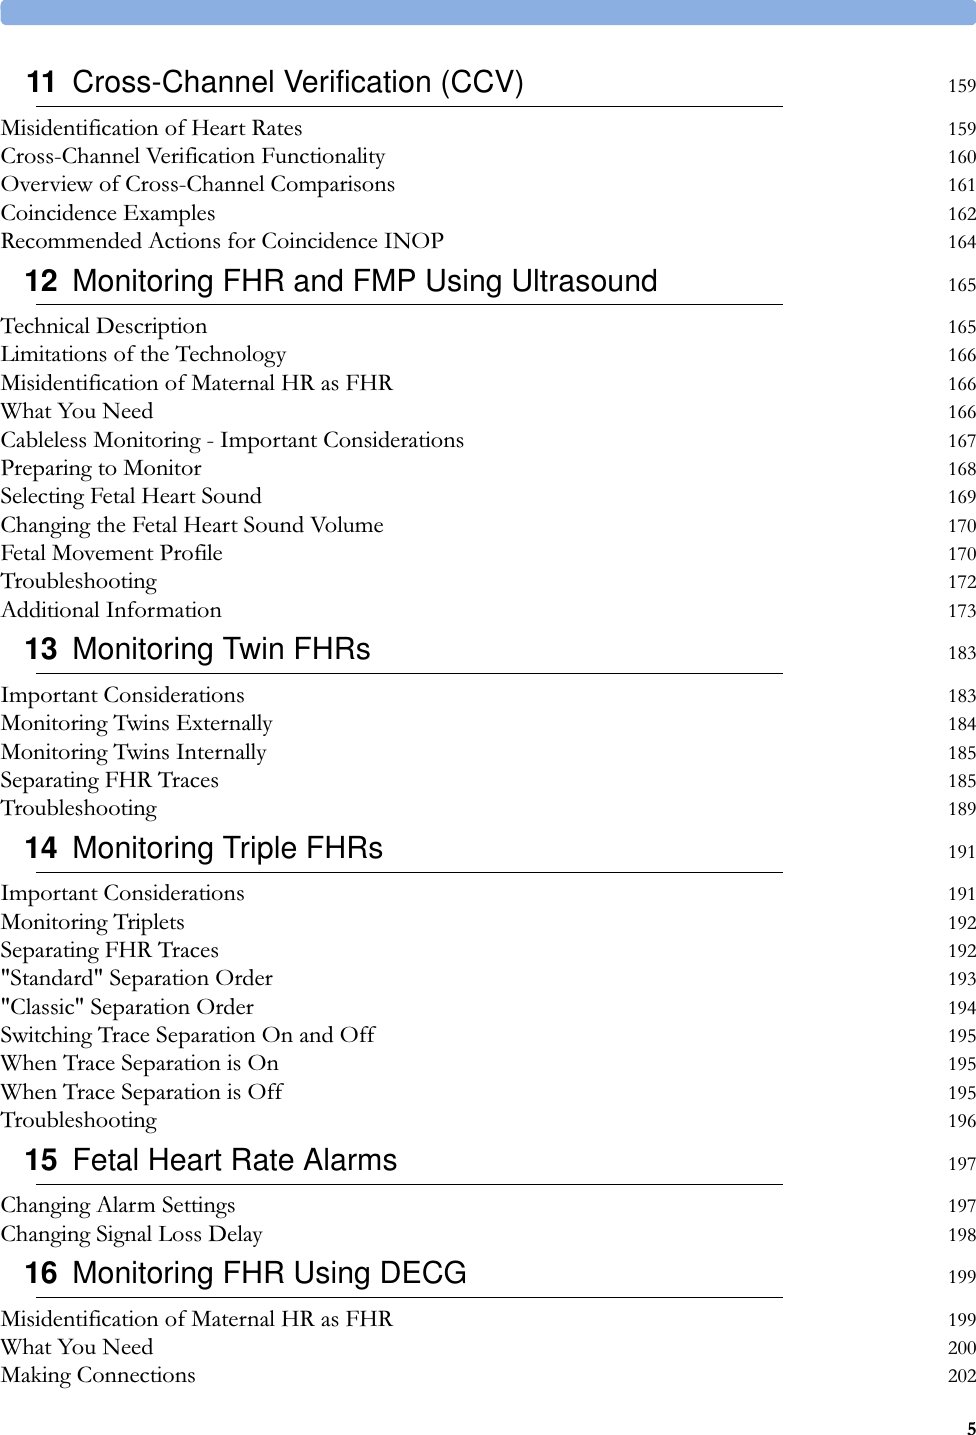 511 Cross-Channel Verification (CCV) 159Misidentification of Heart Rates 159Cross-Channel Verification Functionality 160Overview of Cross-Channel Comparisons 161Coincidence Examples 162Recommended Actions for Coincidence INOP 16412 Monitoring FHR and FMP Using Ultrasound 165Technical Description 165Limitations of the Technology 166Misidentification of Maternal HR as FHR 166What You Need 166Cableless Monitoring - Important Considerations 167Preparing to Monitor 168Selecting Fetal Heart Sound 169Changing the Fetal Heart Sound Volume 170Fetal Movement Profile 170Troubleshooting 172Additional Information 17313 Monitoring Twin FHRs 183Important Considerations 183Monitoring Twins Externally 184Monitoring Twins Internally 185Separating FHR Traces 185Troubleshooting 18914 Monitoring Triple FHRs 191Important Considerations 191Monitoring Triplets 192Separating FHR Traces 192&quot;Standard&quot; Separation Order 193&quot;Classic&quot; Separation Order 194Switching Trace Separation On and Off 195When Trace Separation is On 195When Trace Separation is Off 195Troubleshooting 19615 Fetal Heart Rate Alarms 197Changing Alarm Settings 197Changing Signal Loss Delay 19816 Monitoring FHR Using DECG 199Misidentification of Maternal HR as FHR 199What You Need 200Making Connections 202